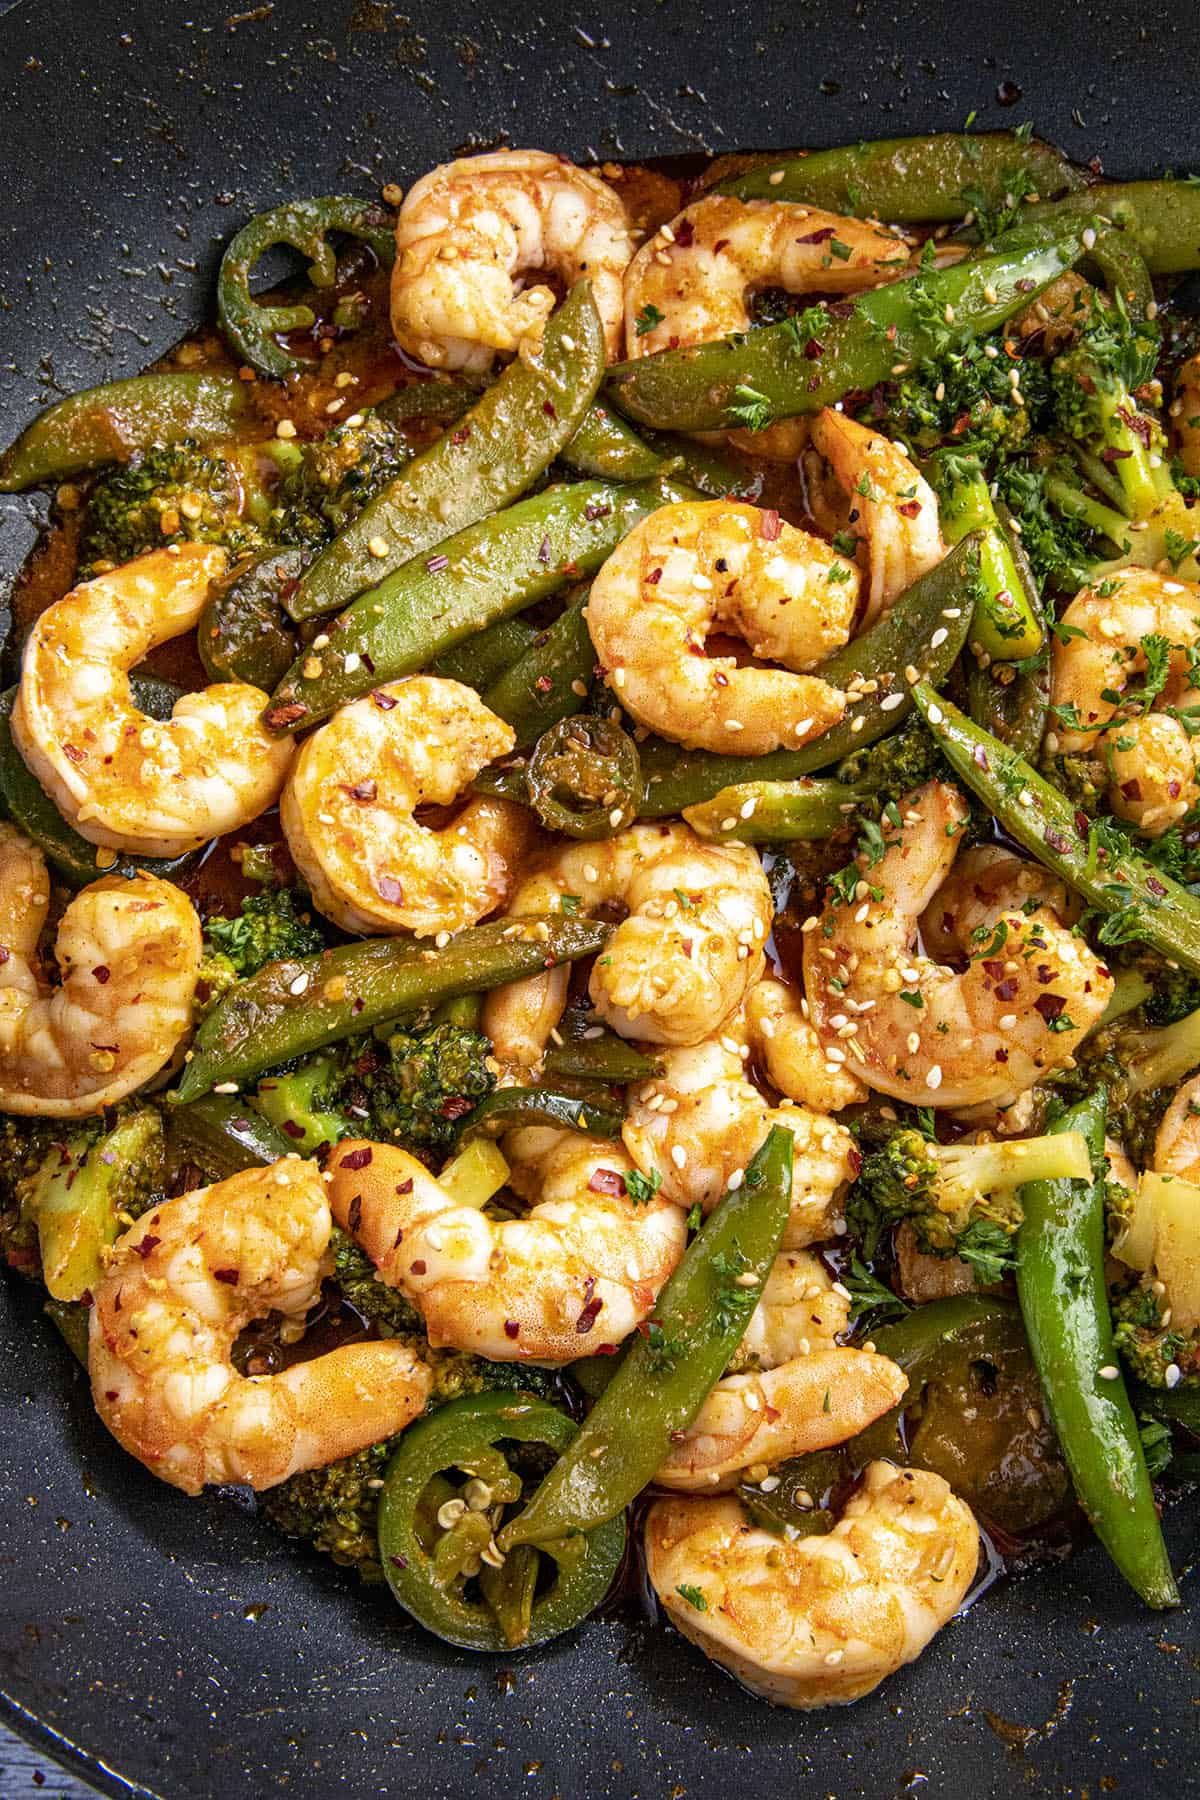 Spicy Shrimp Stir Fry Recipe in a wok with lots of shrimp and vegetables